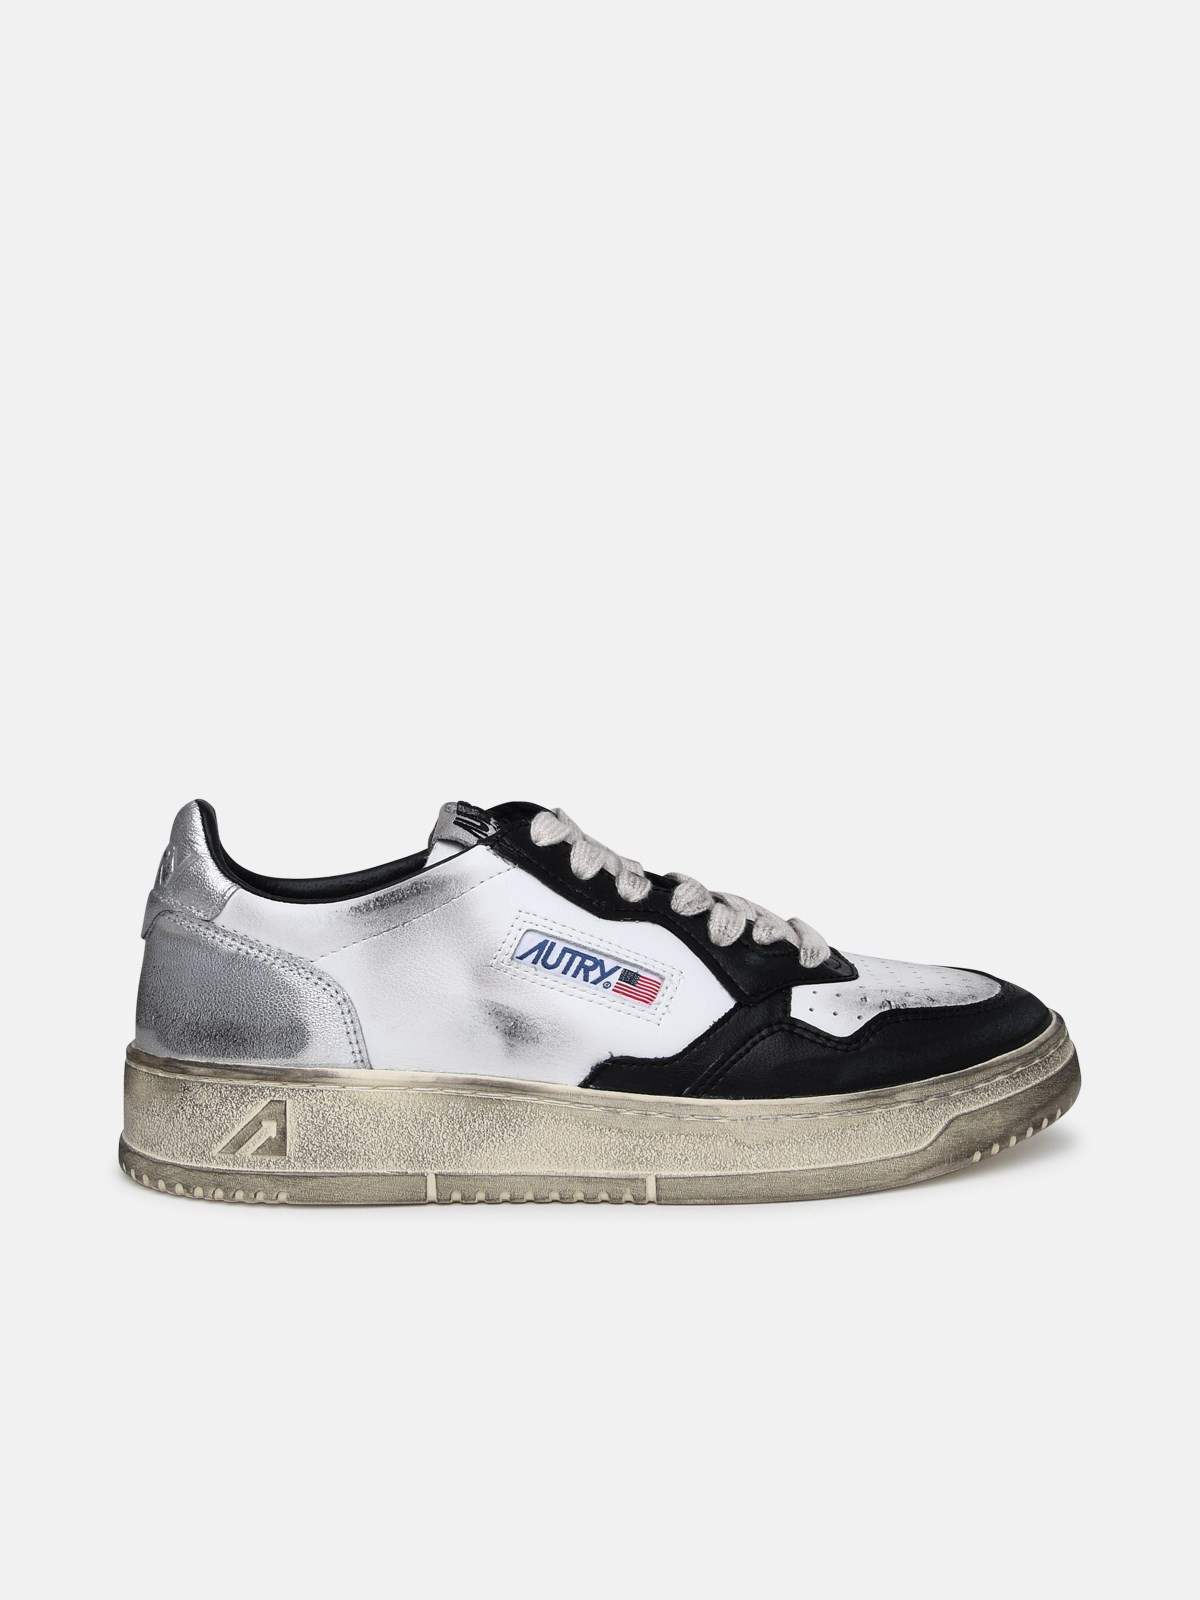 Autry Super Vintage Two-color Leather Sneakers In White